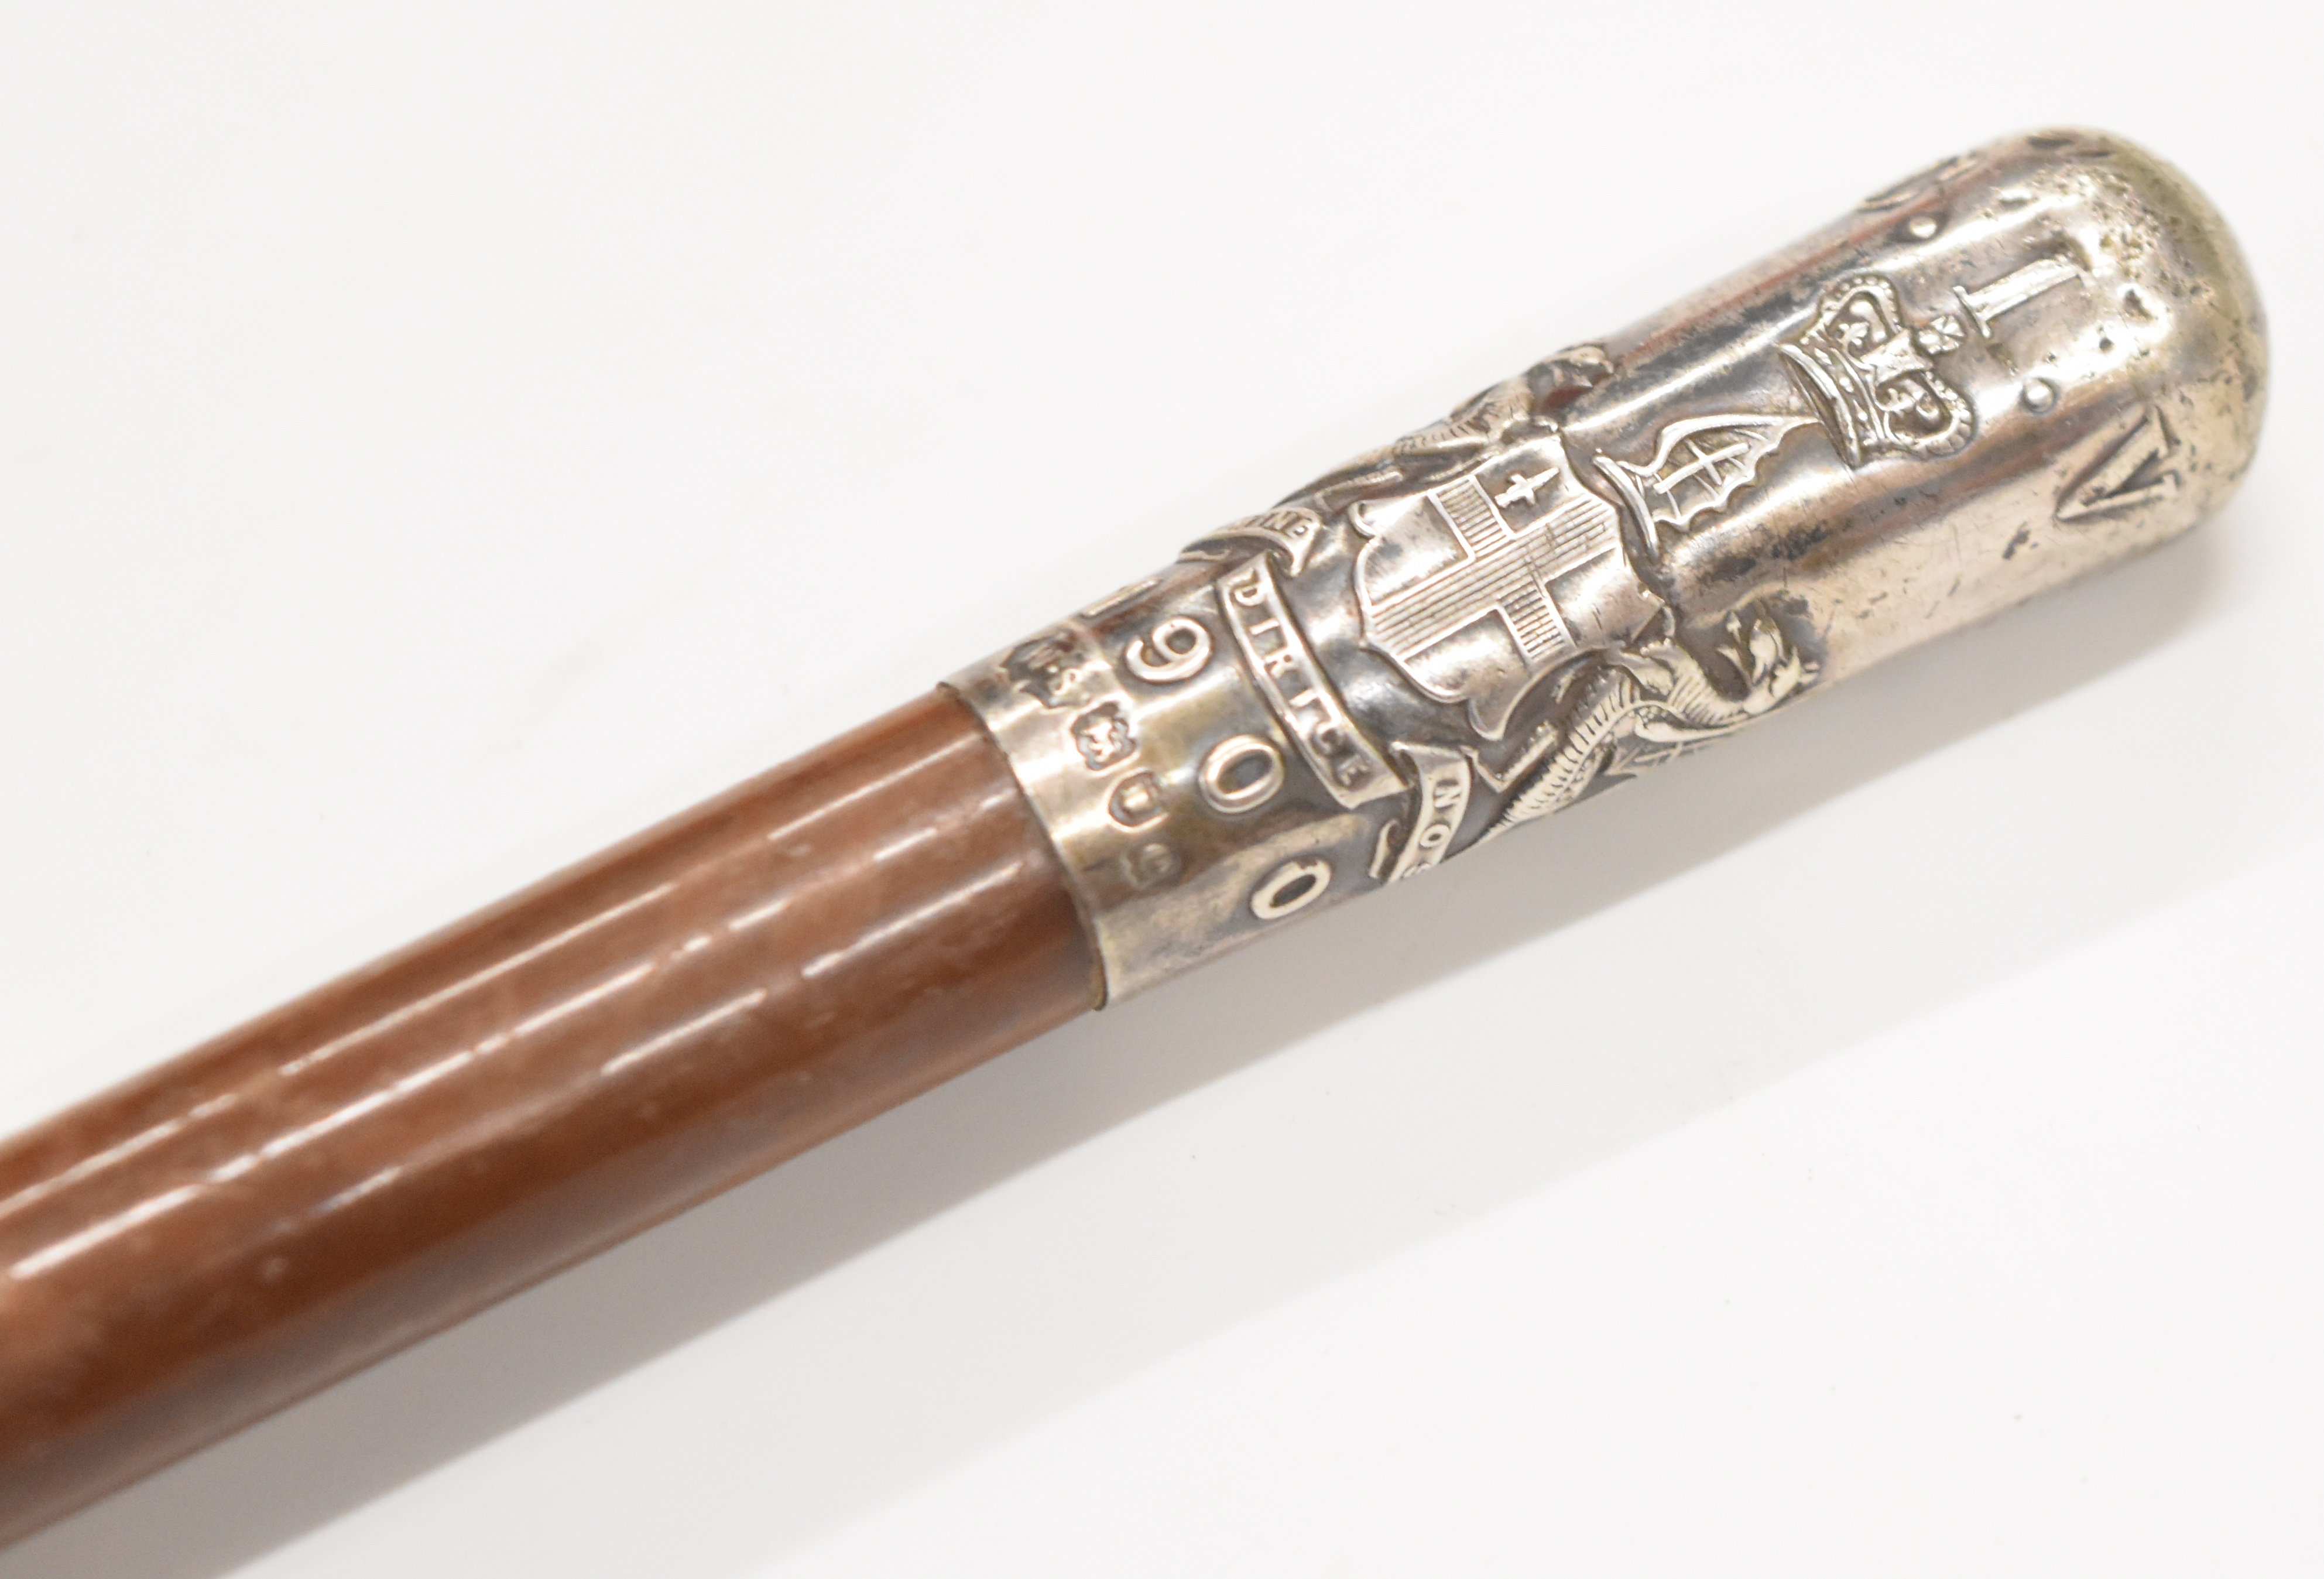 Boer War City Imperial Volunteers swagger stick with hallmarked silver top embossed CIV over City of - Image 2 of 3